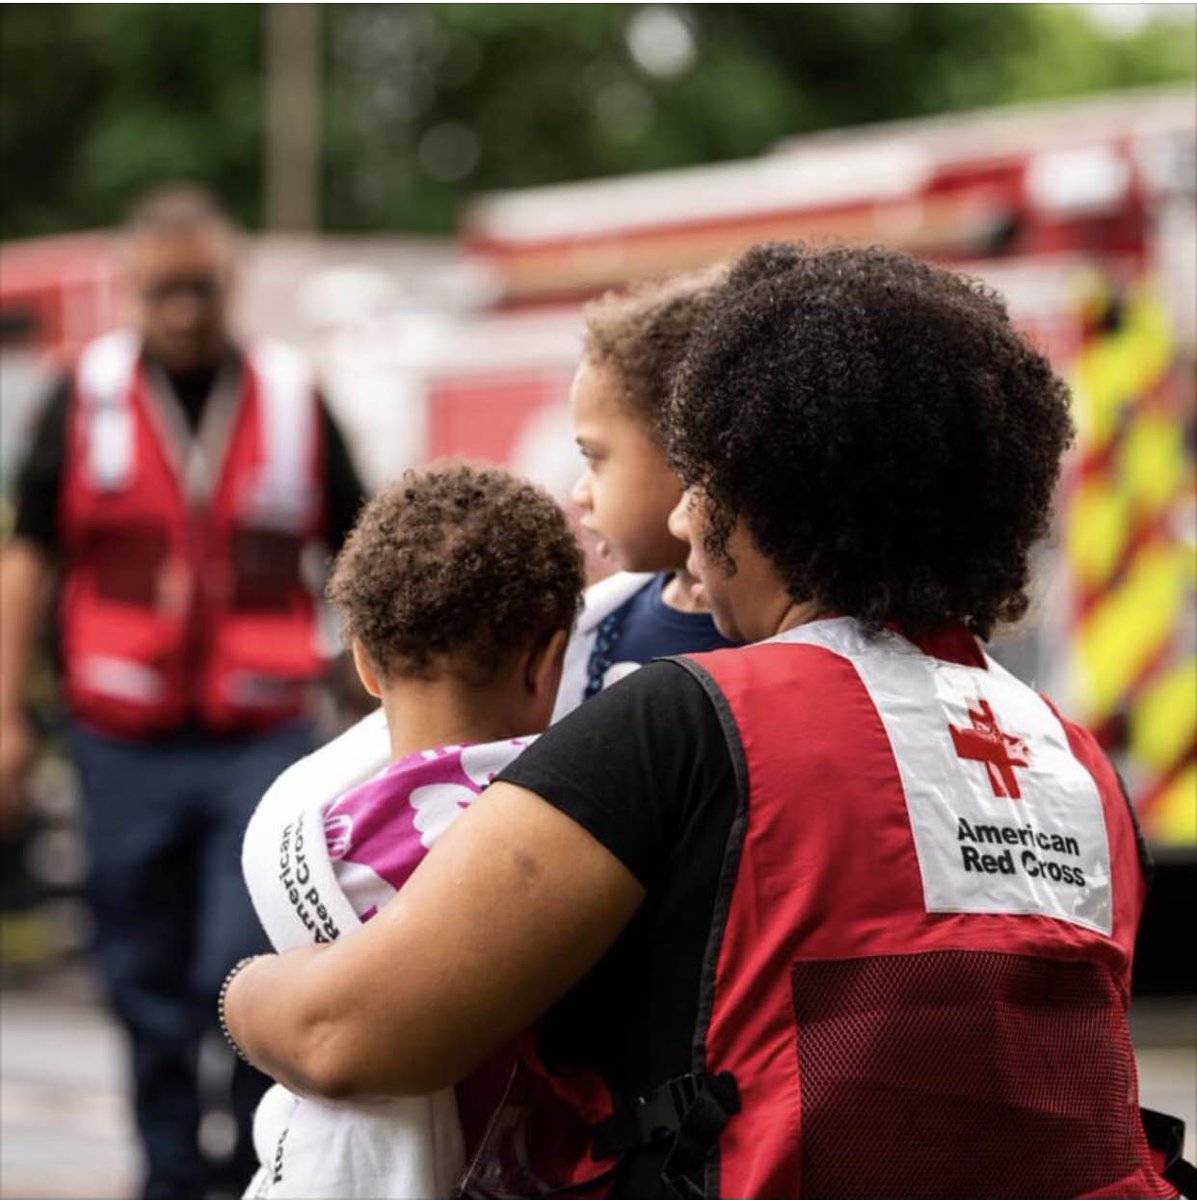 We need local disaster volunteers to sign up today! Join us as a Disaster Action Team member to help people in your area affected by home fires and disasters. Sign up to apply by setting up a Volunteer Connection account which will take 15 minutes. redcross.org/jointoday